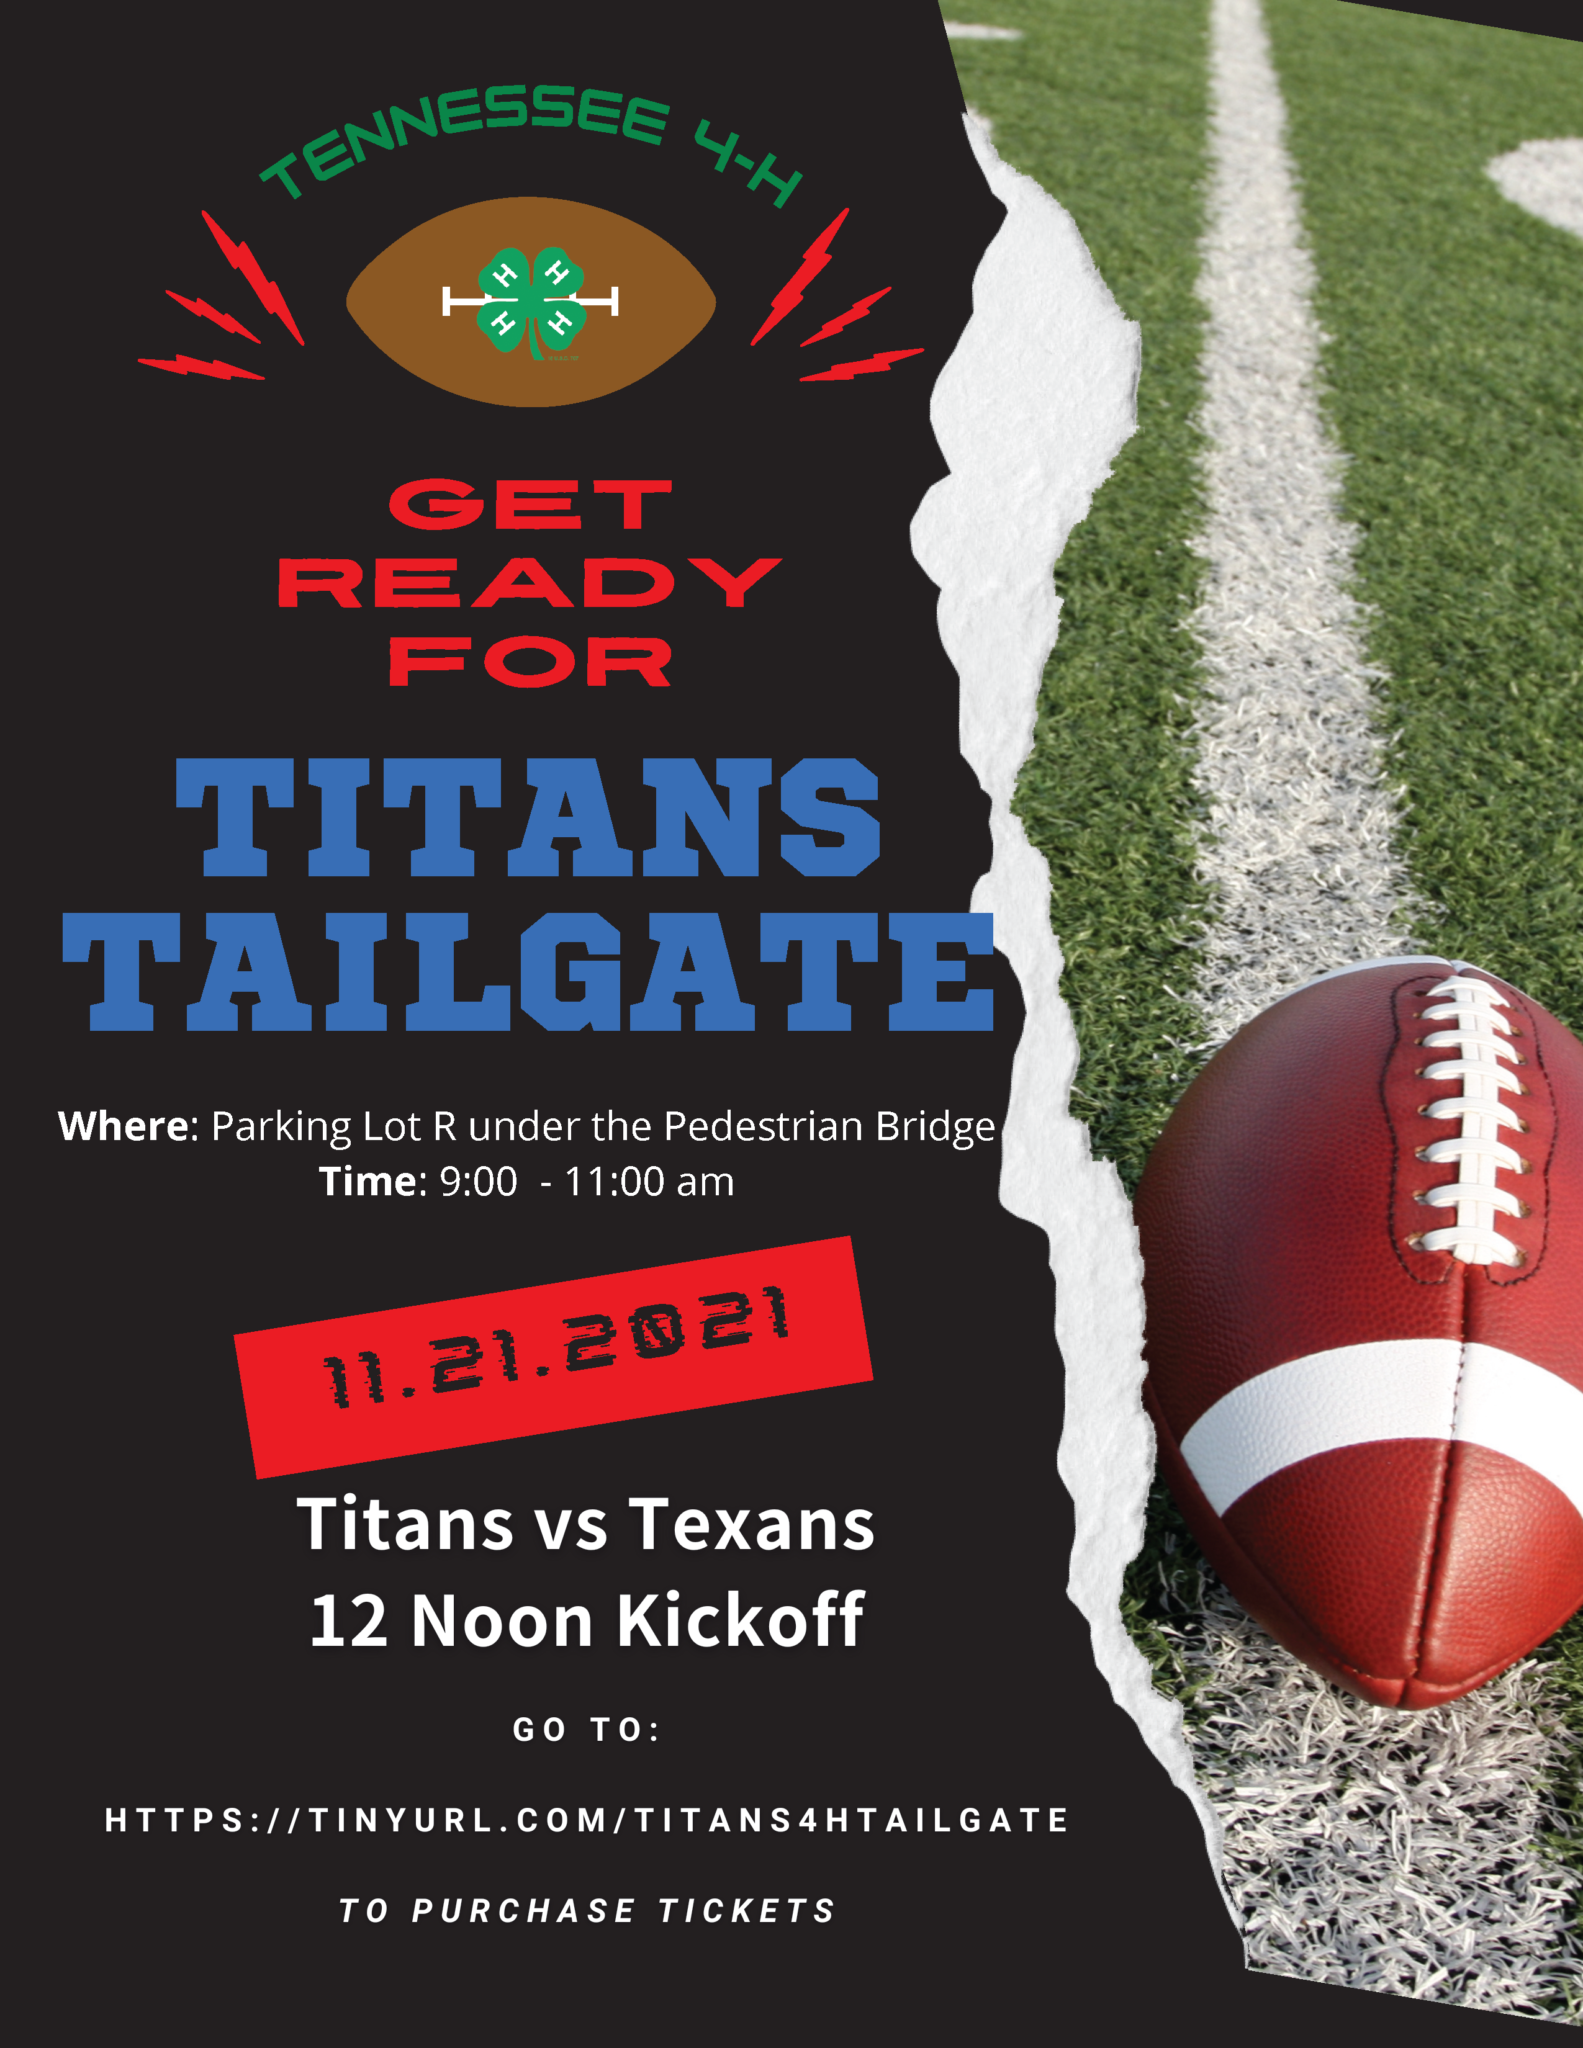 Save the Date Titans 4H Tailgate Tennessee 4H Youth Development